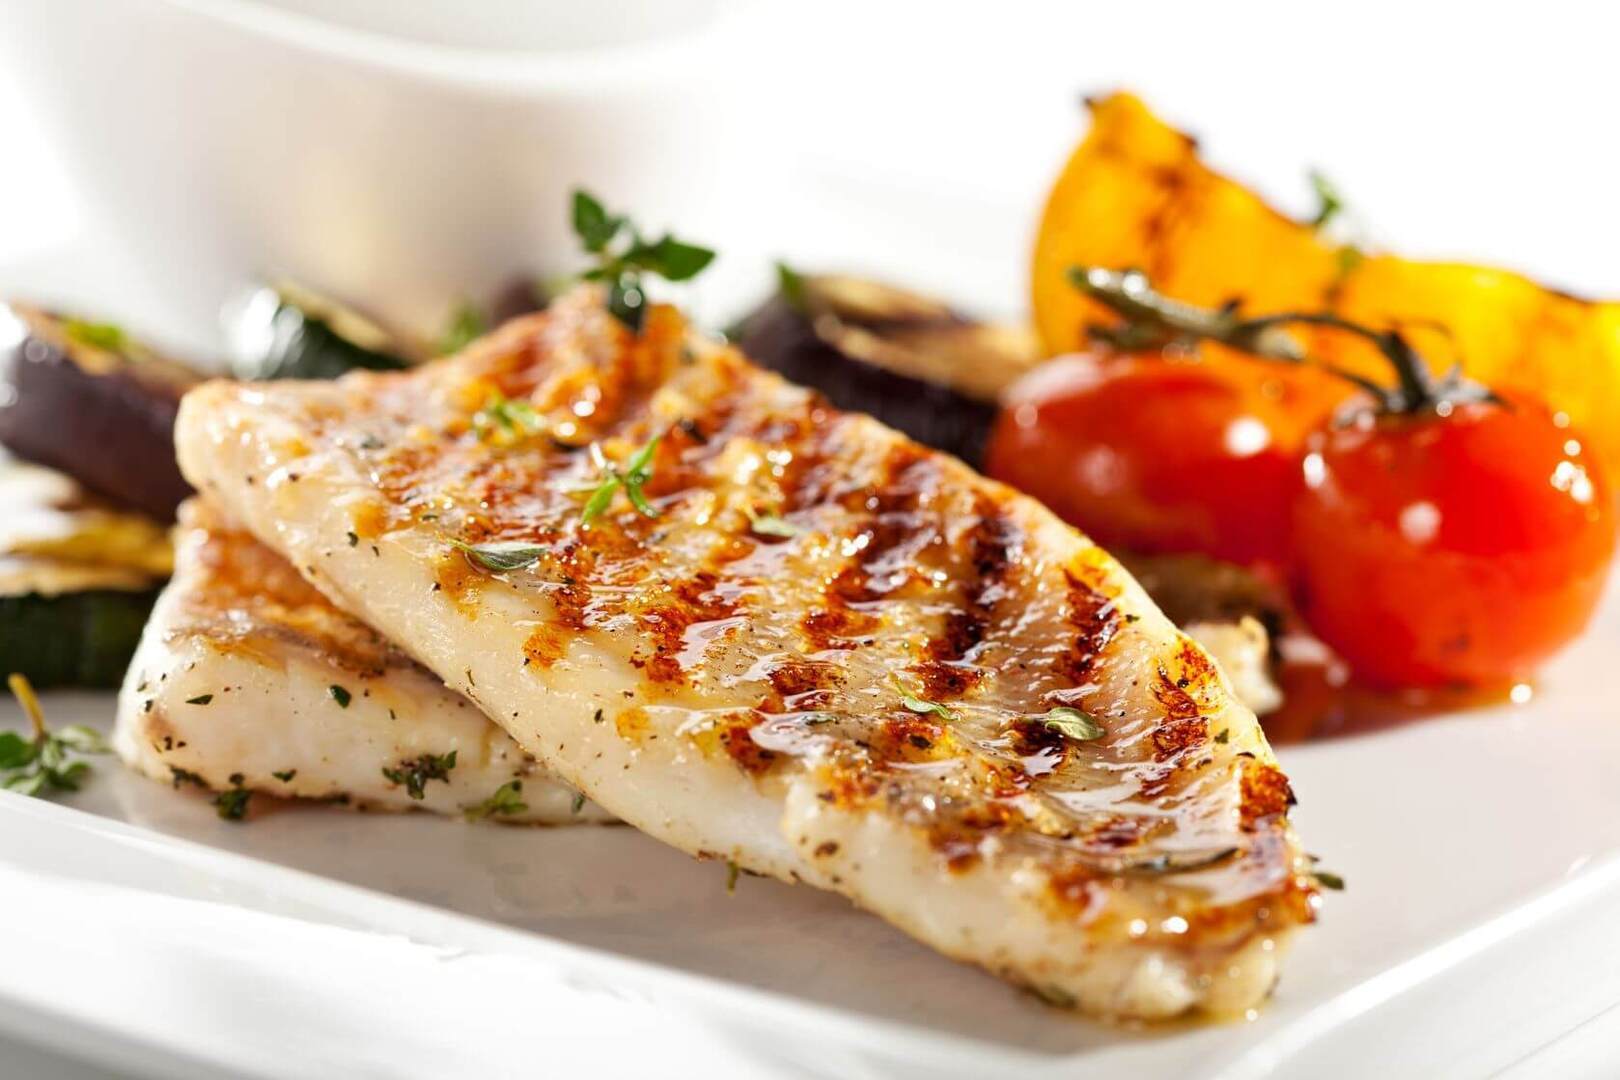 A photo of grilled fish fillet with vegtables